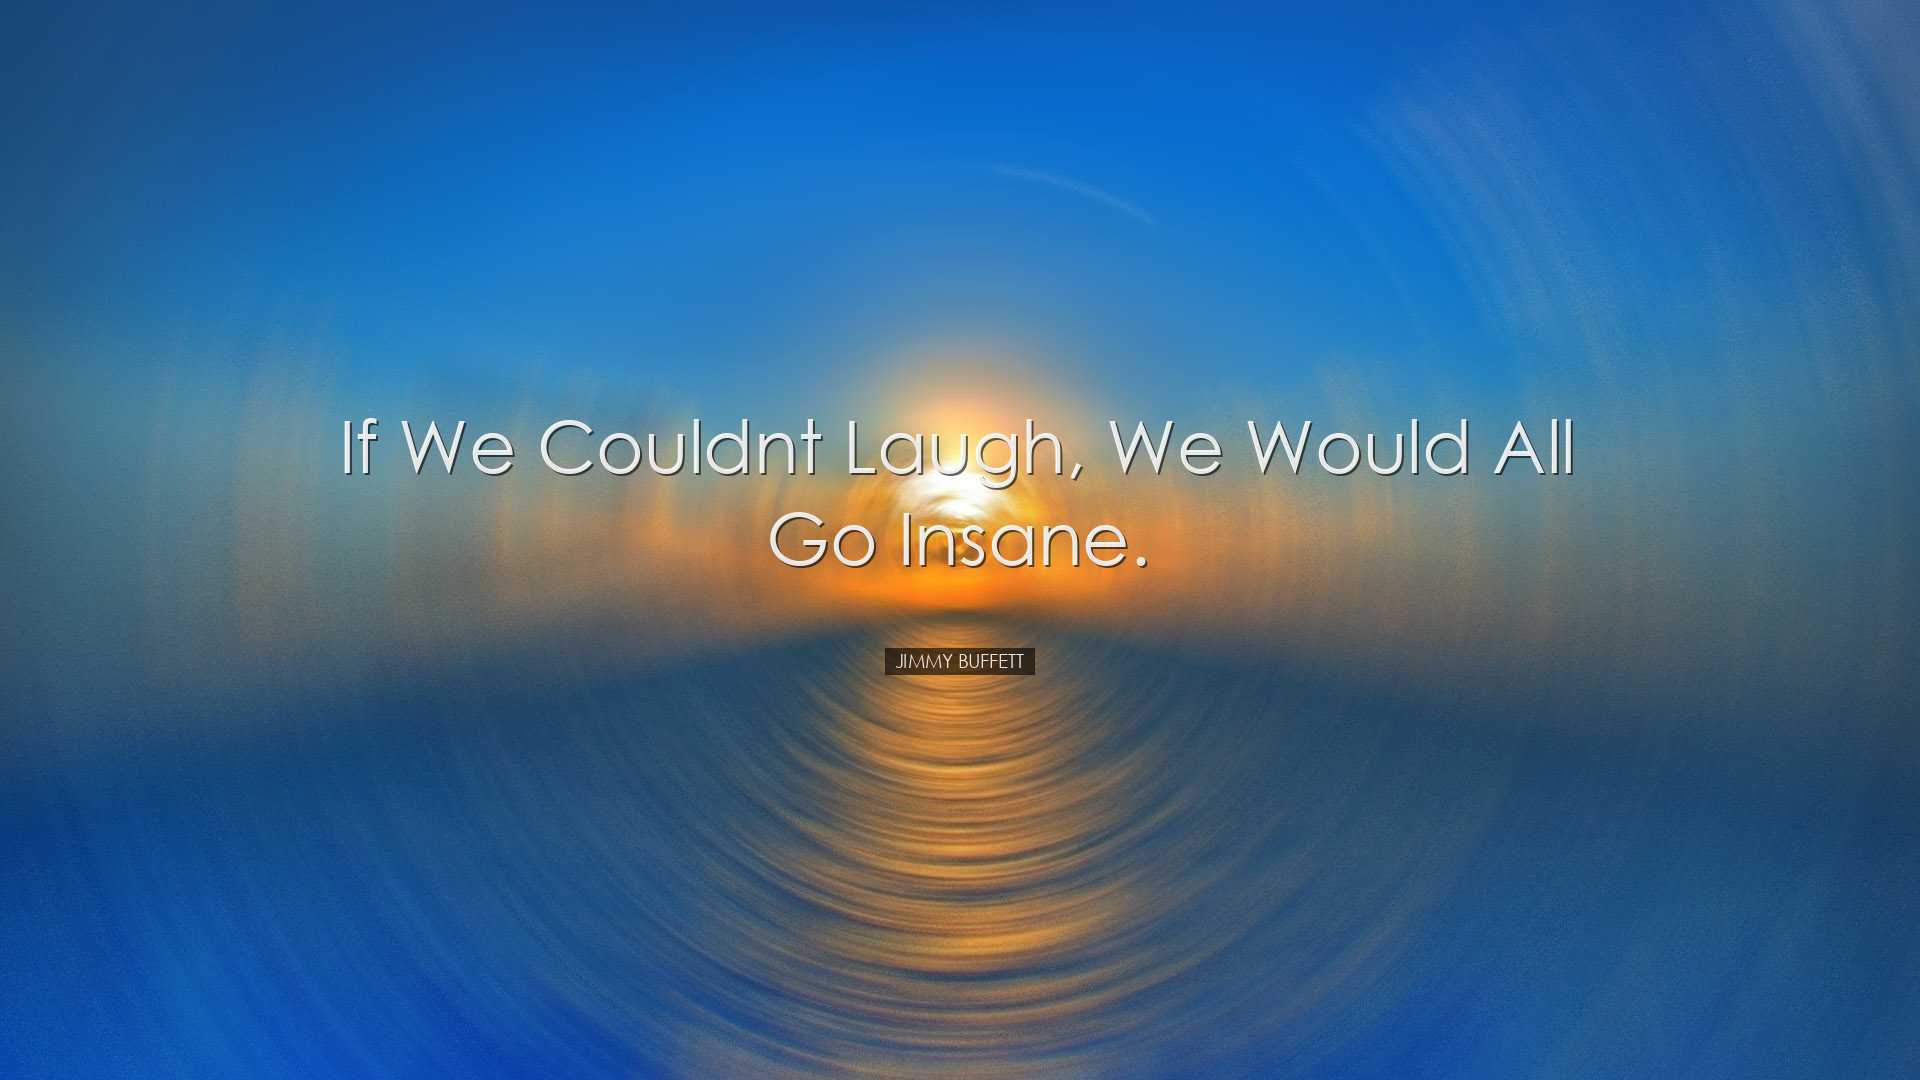 If we couldnt laugh, we would all go insane. - Jimmy Buffett